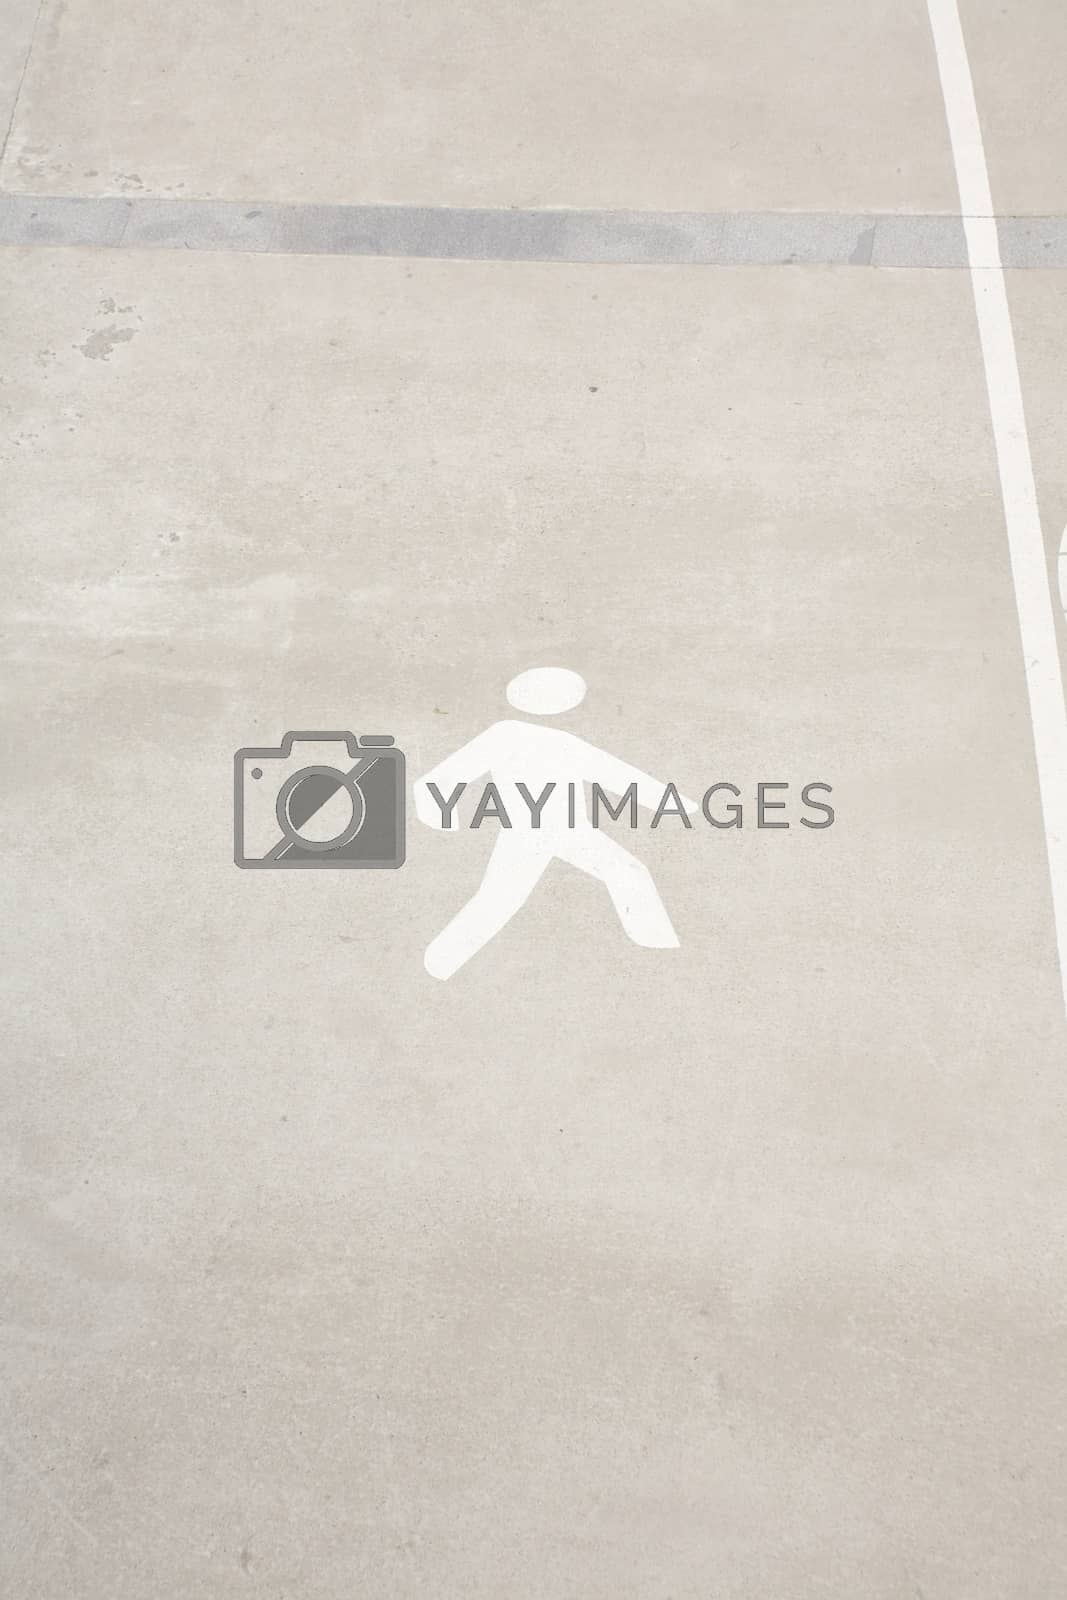 Royalty free image of pedestrian lane sign by quintanilla